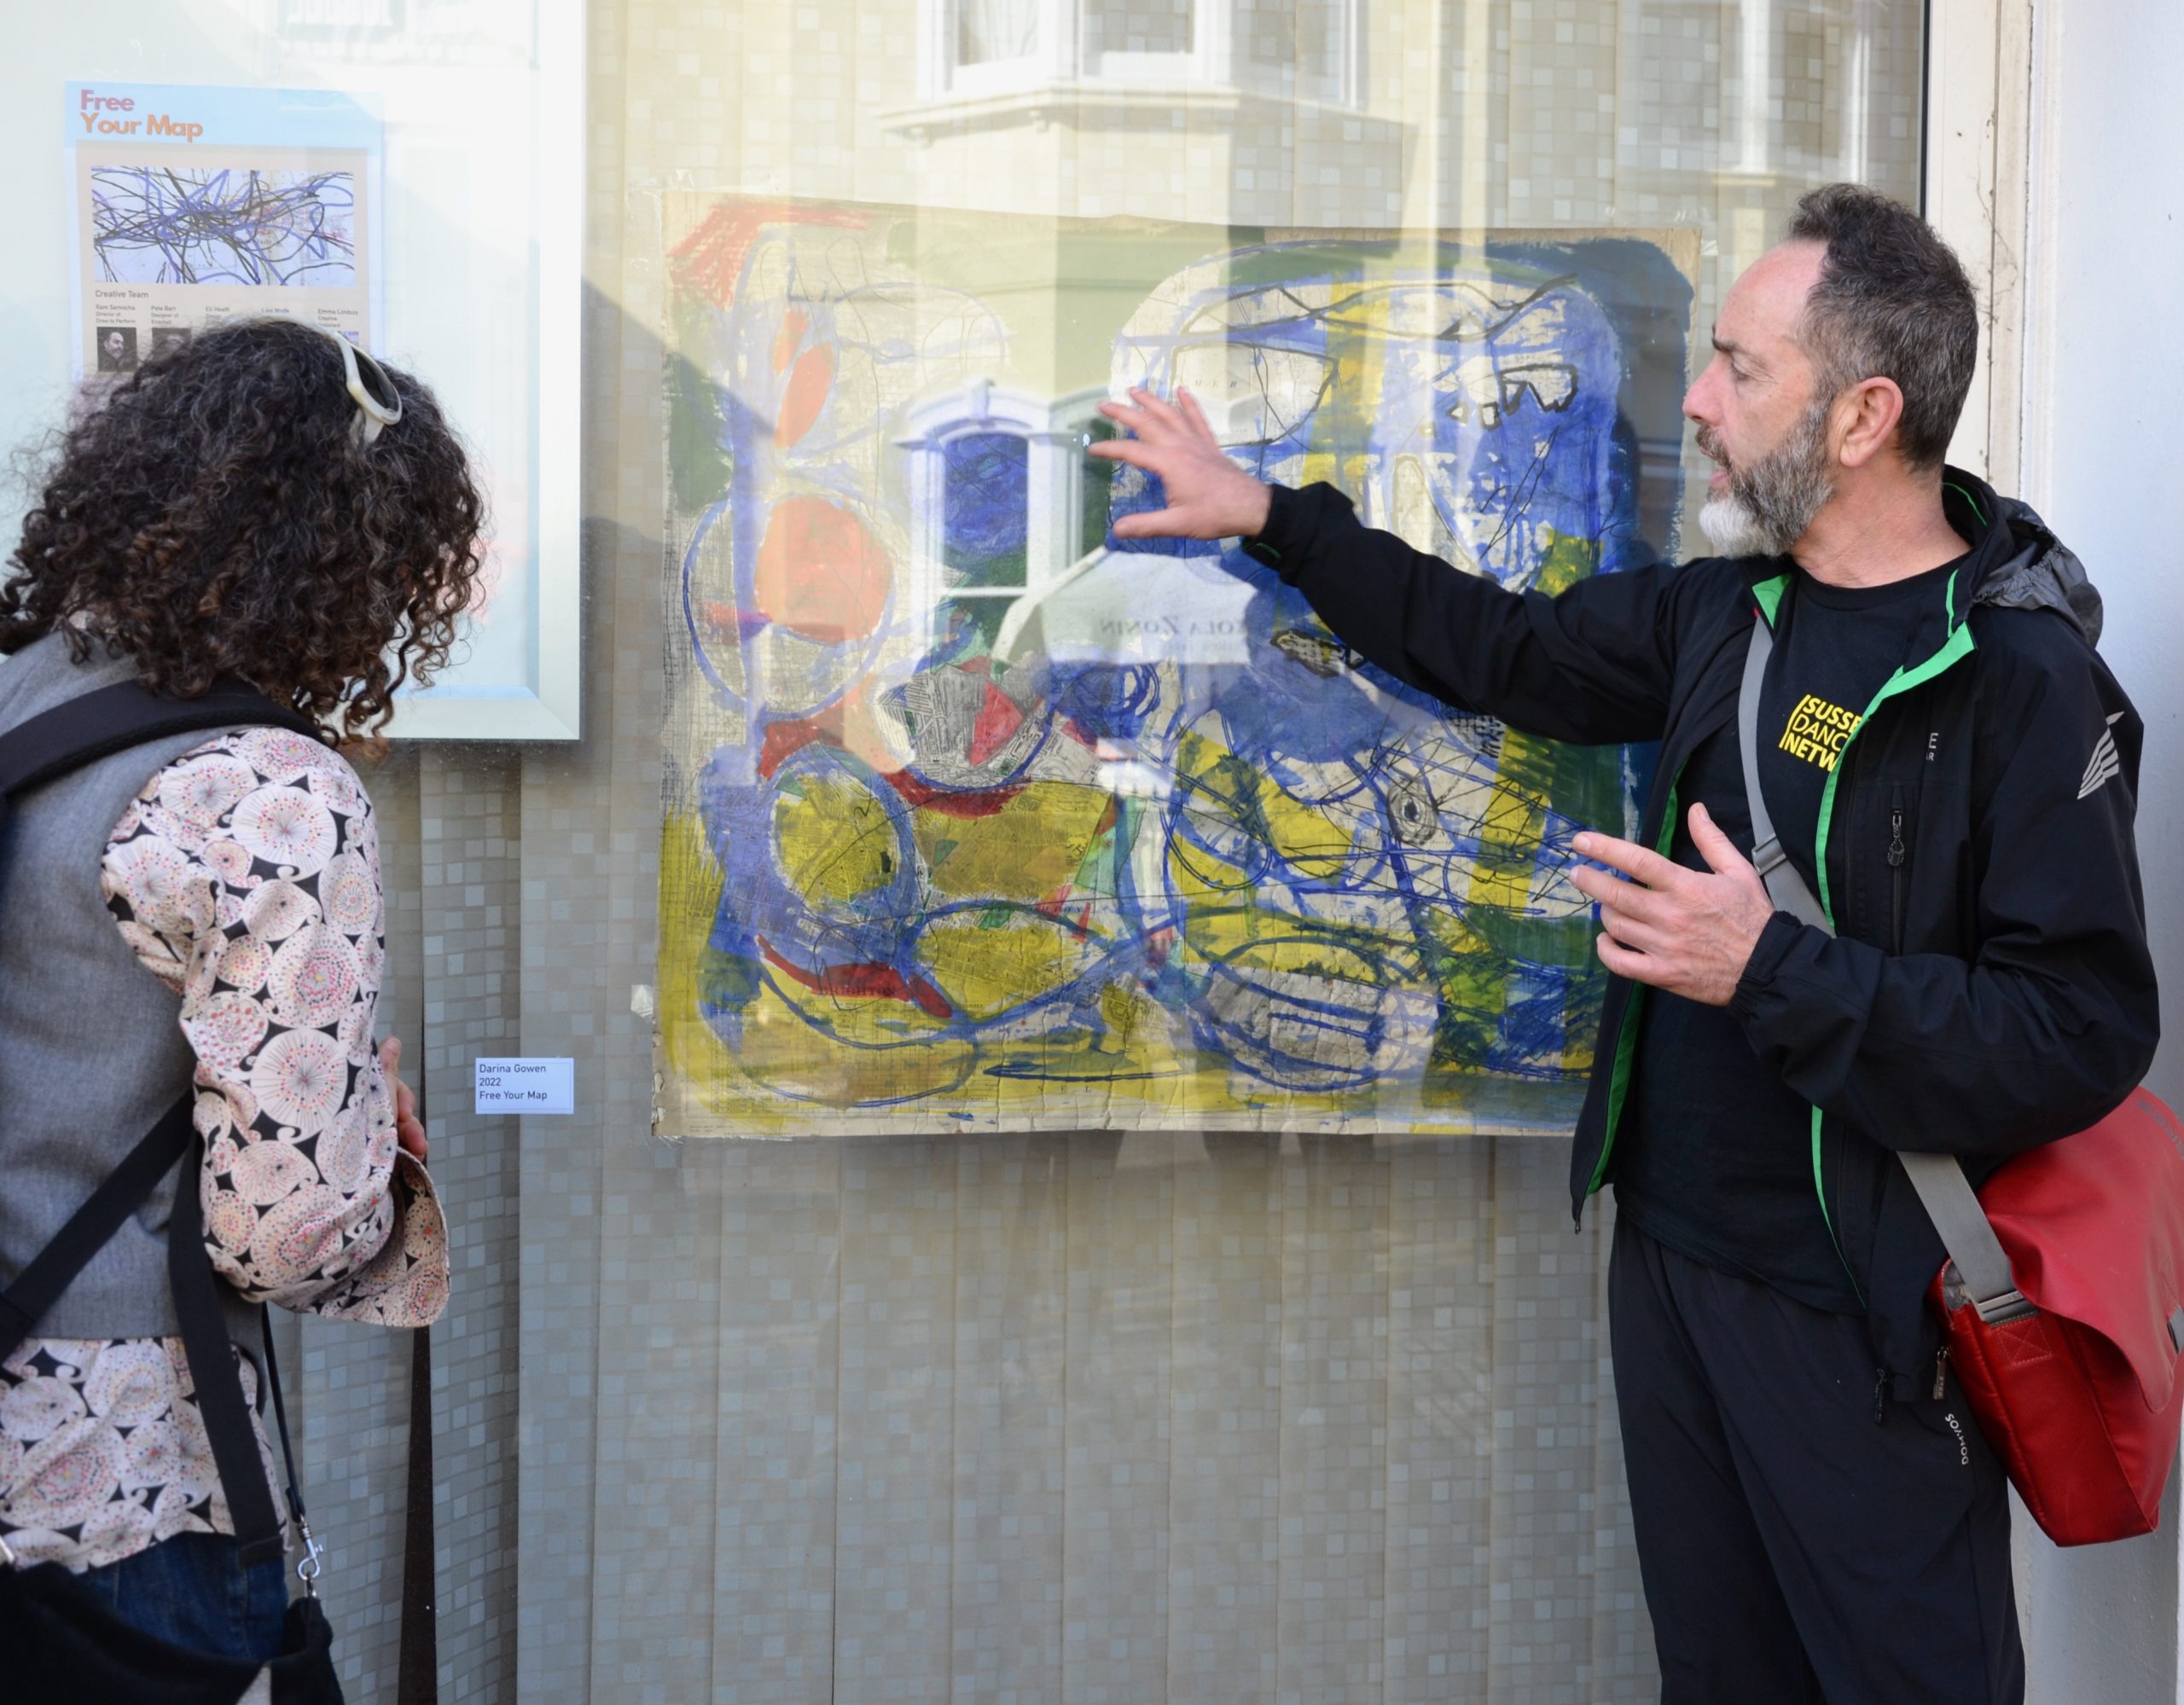 A man points at a painting displayed in a window as a woman looks at it.